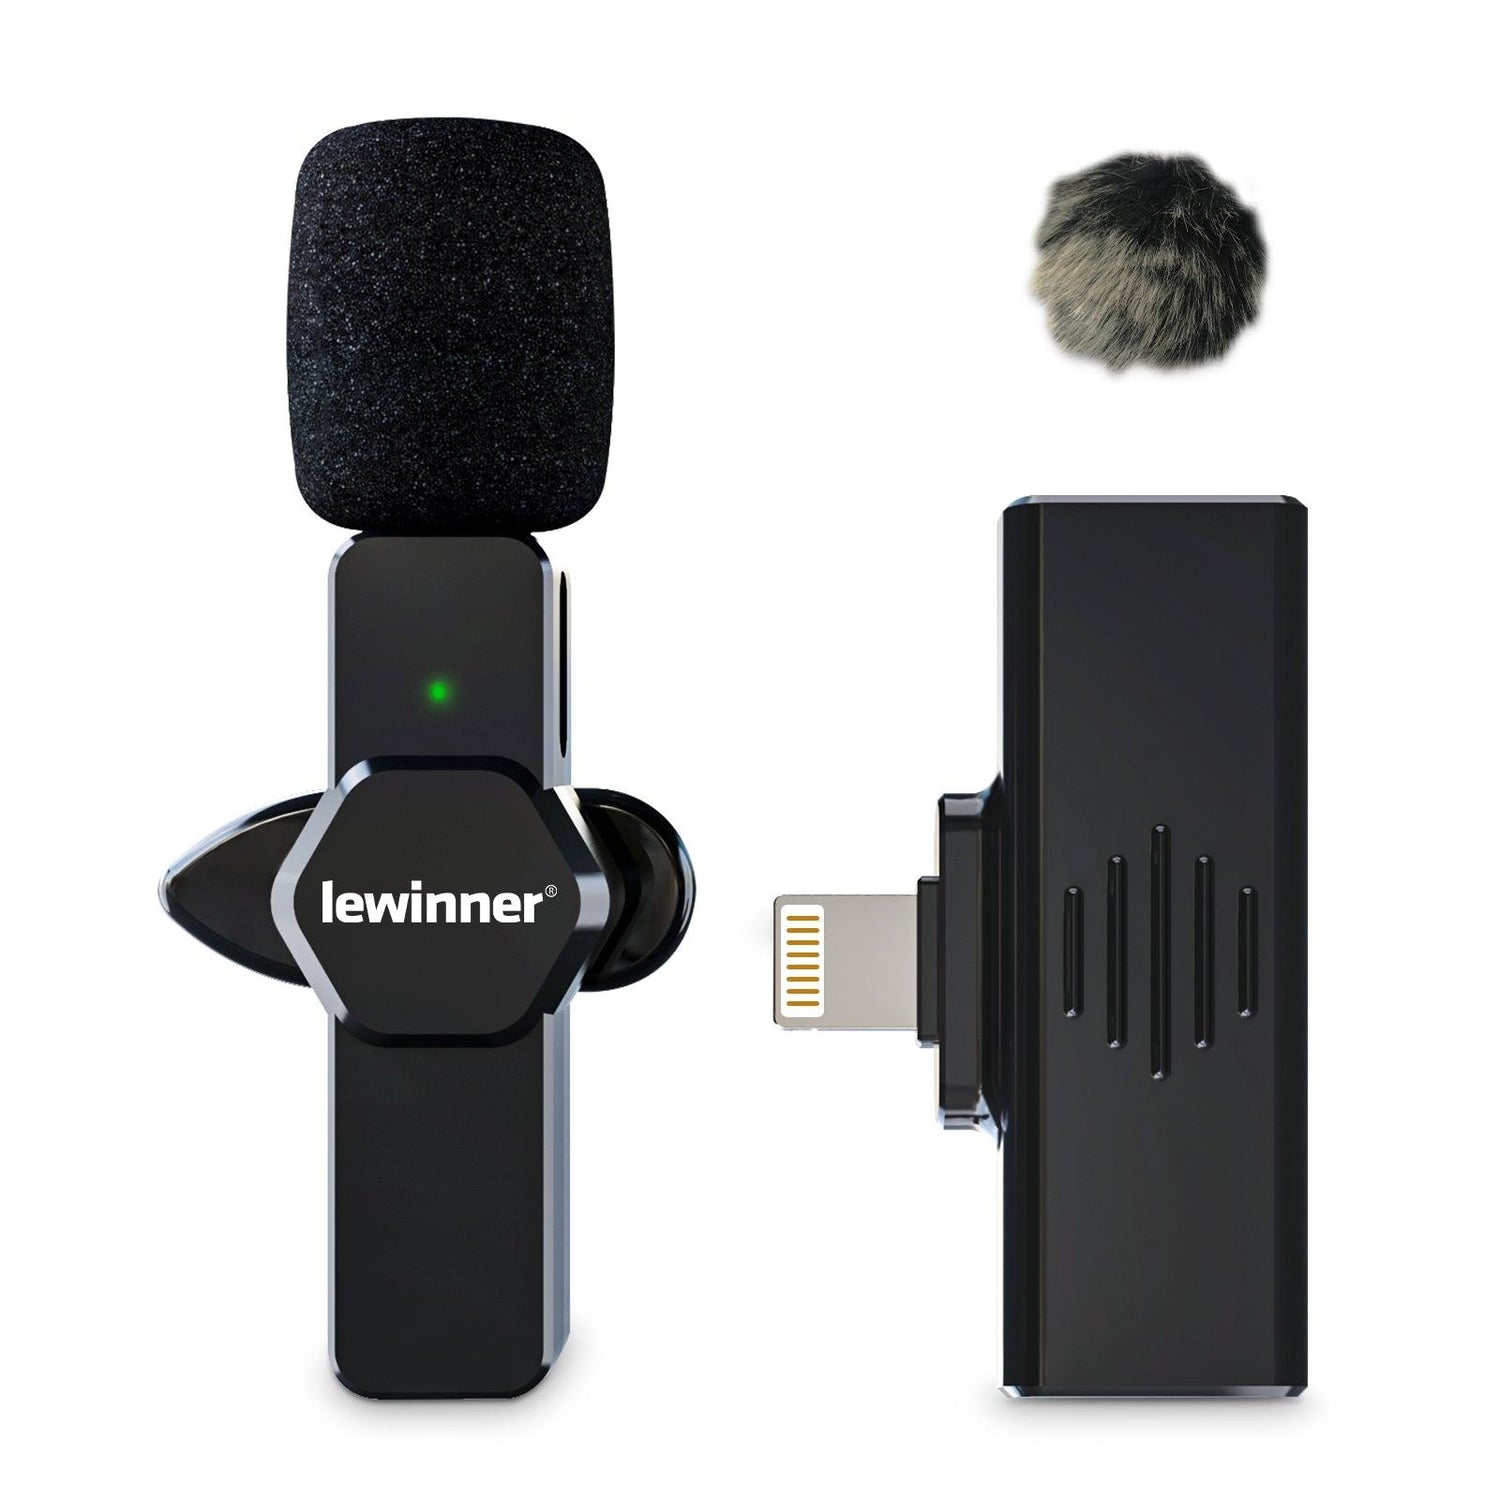 Lewinner Wireless Lavalier Microphone for iPhone and iPad(WM-10)